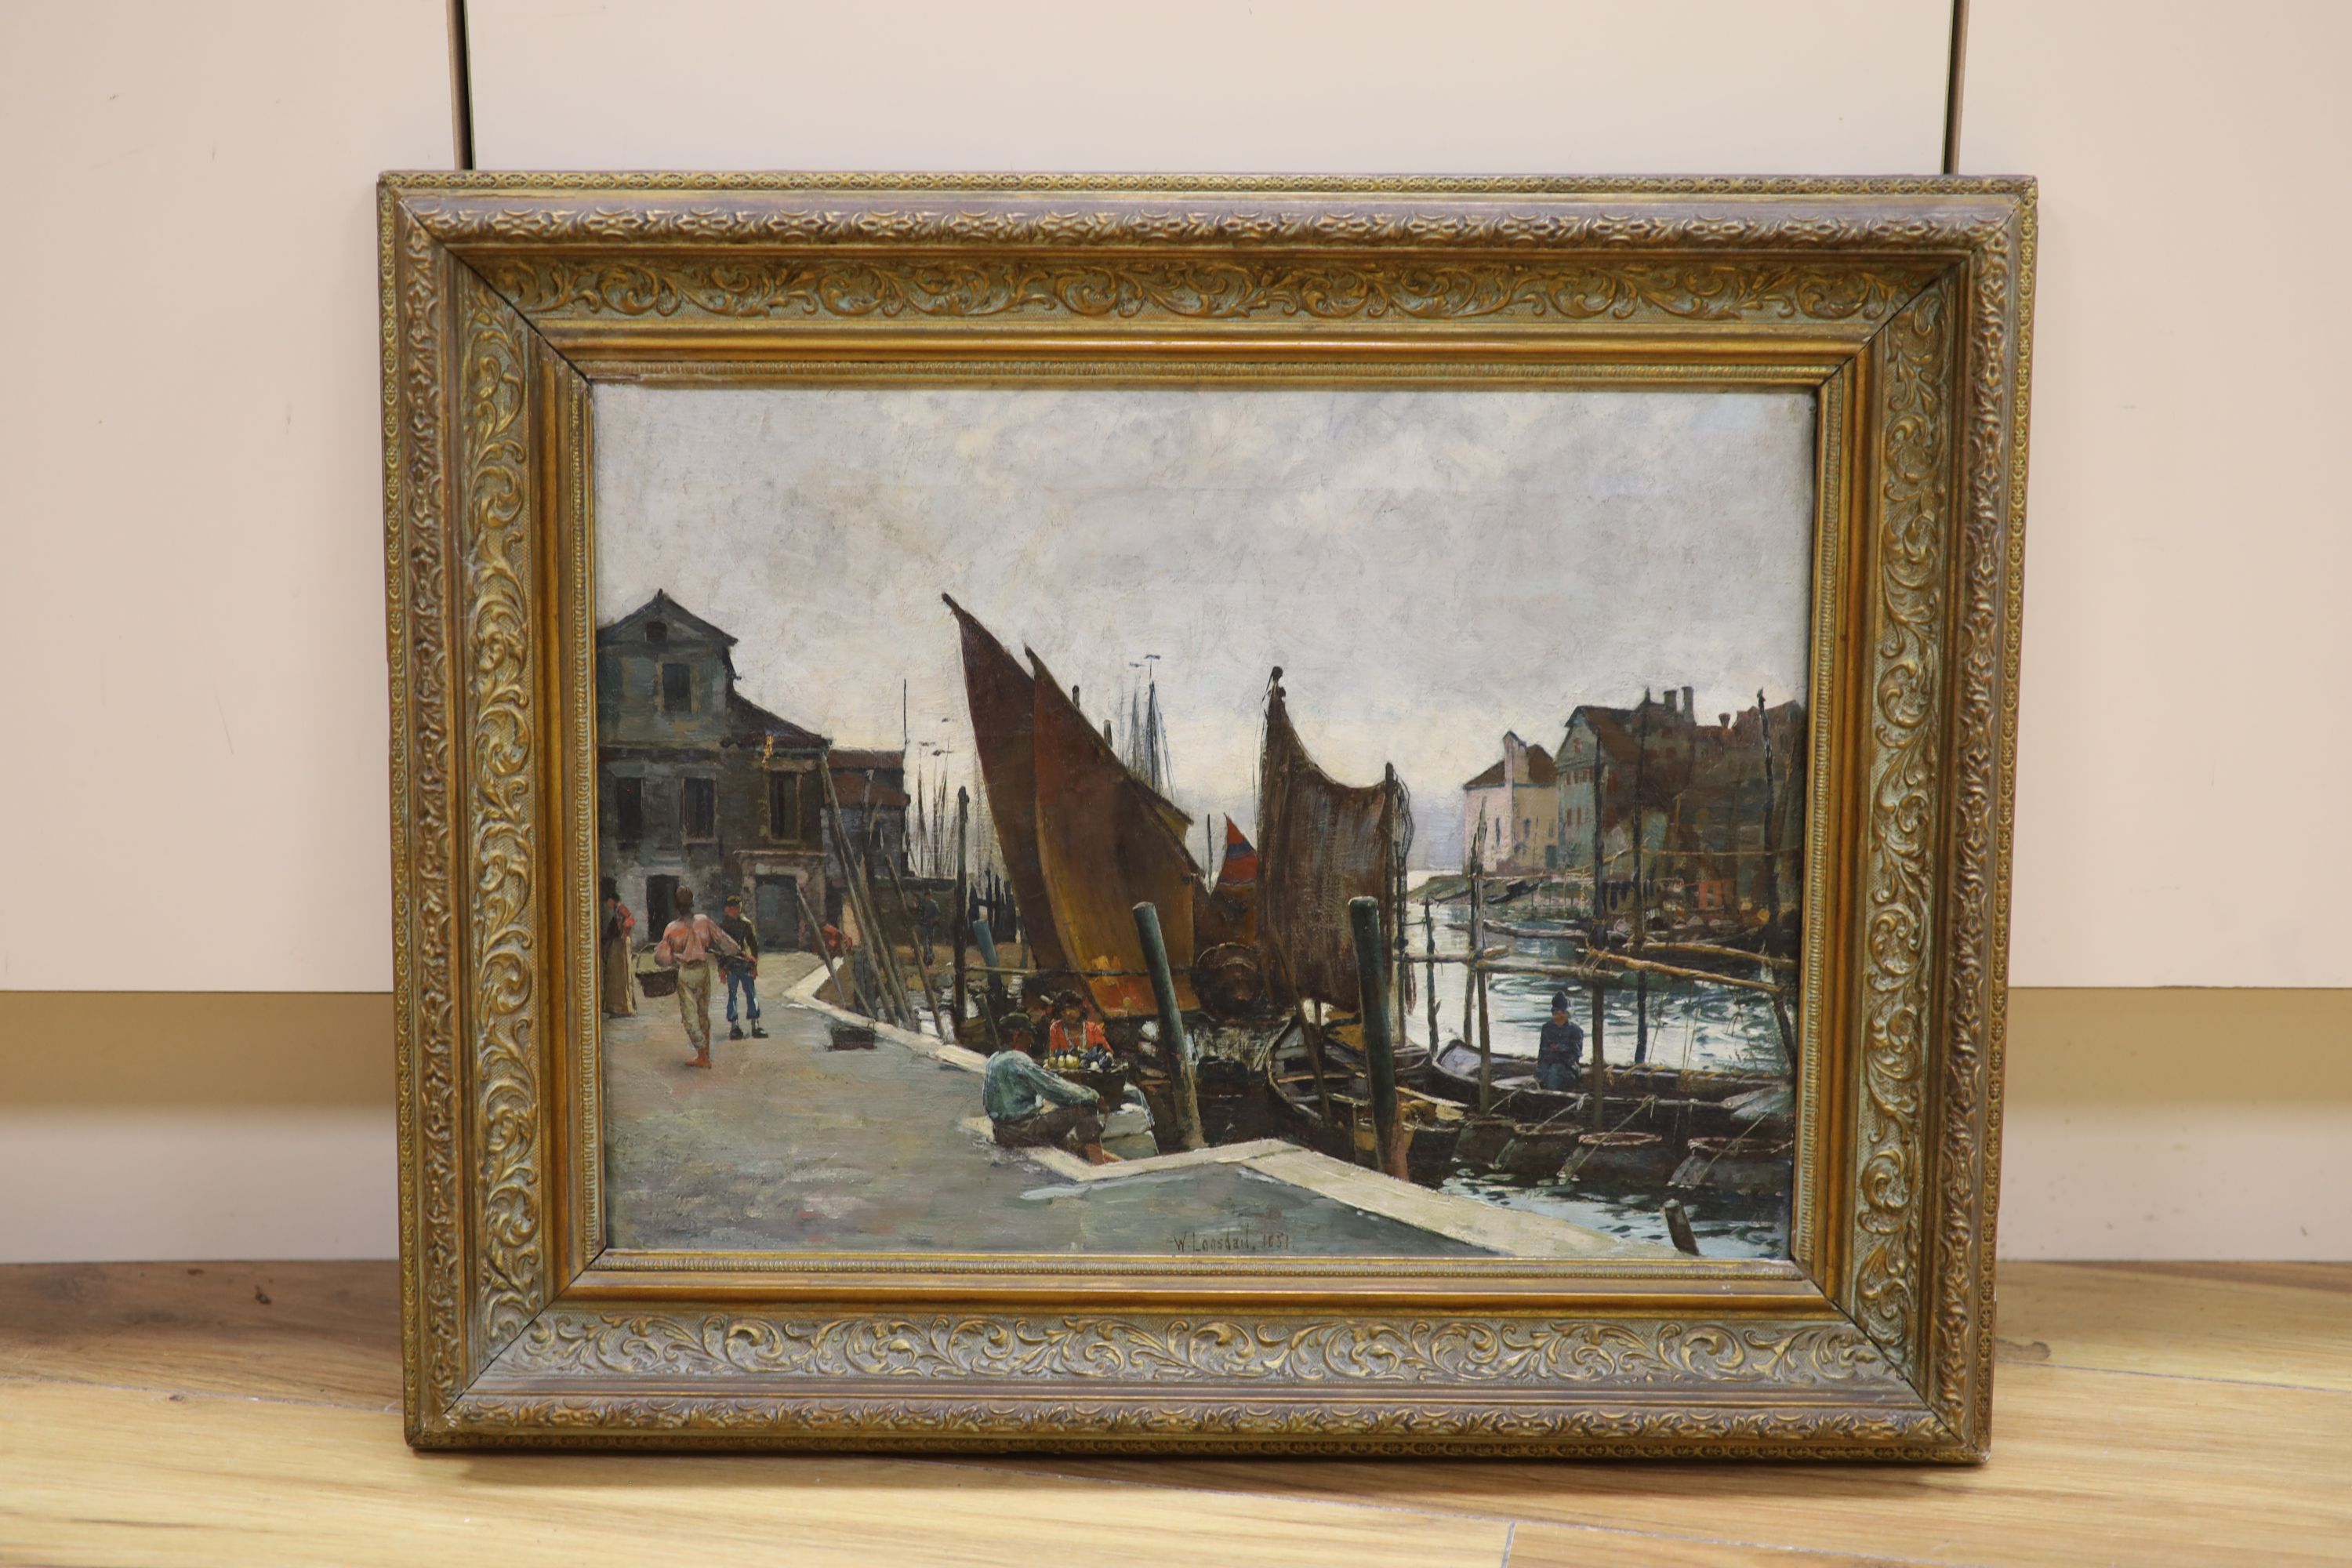 William Logsdail (1859-1944), oil on canvas, The docks at Antwerp, signed and DATED 1881, 30 x 41cm